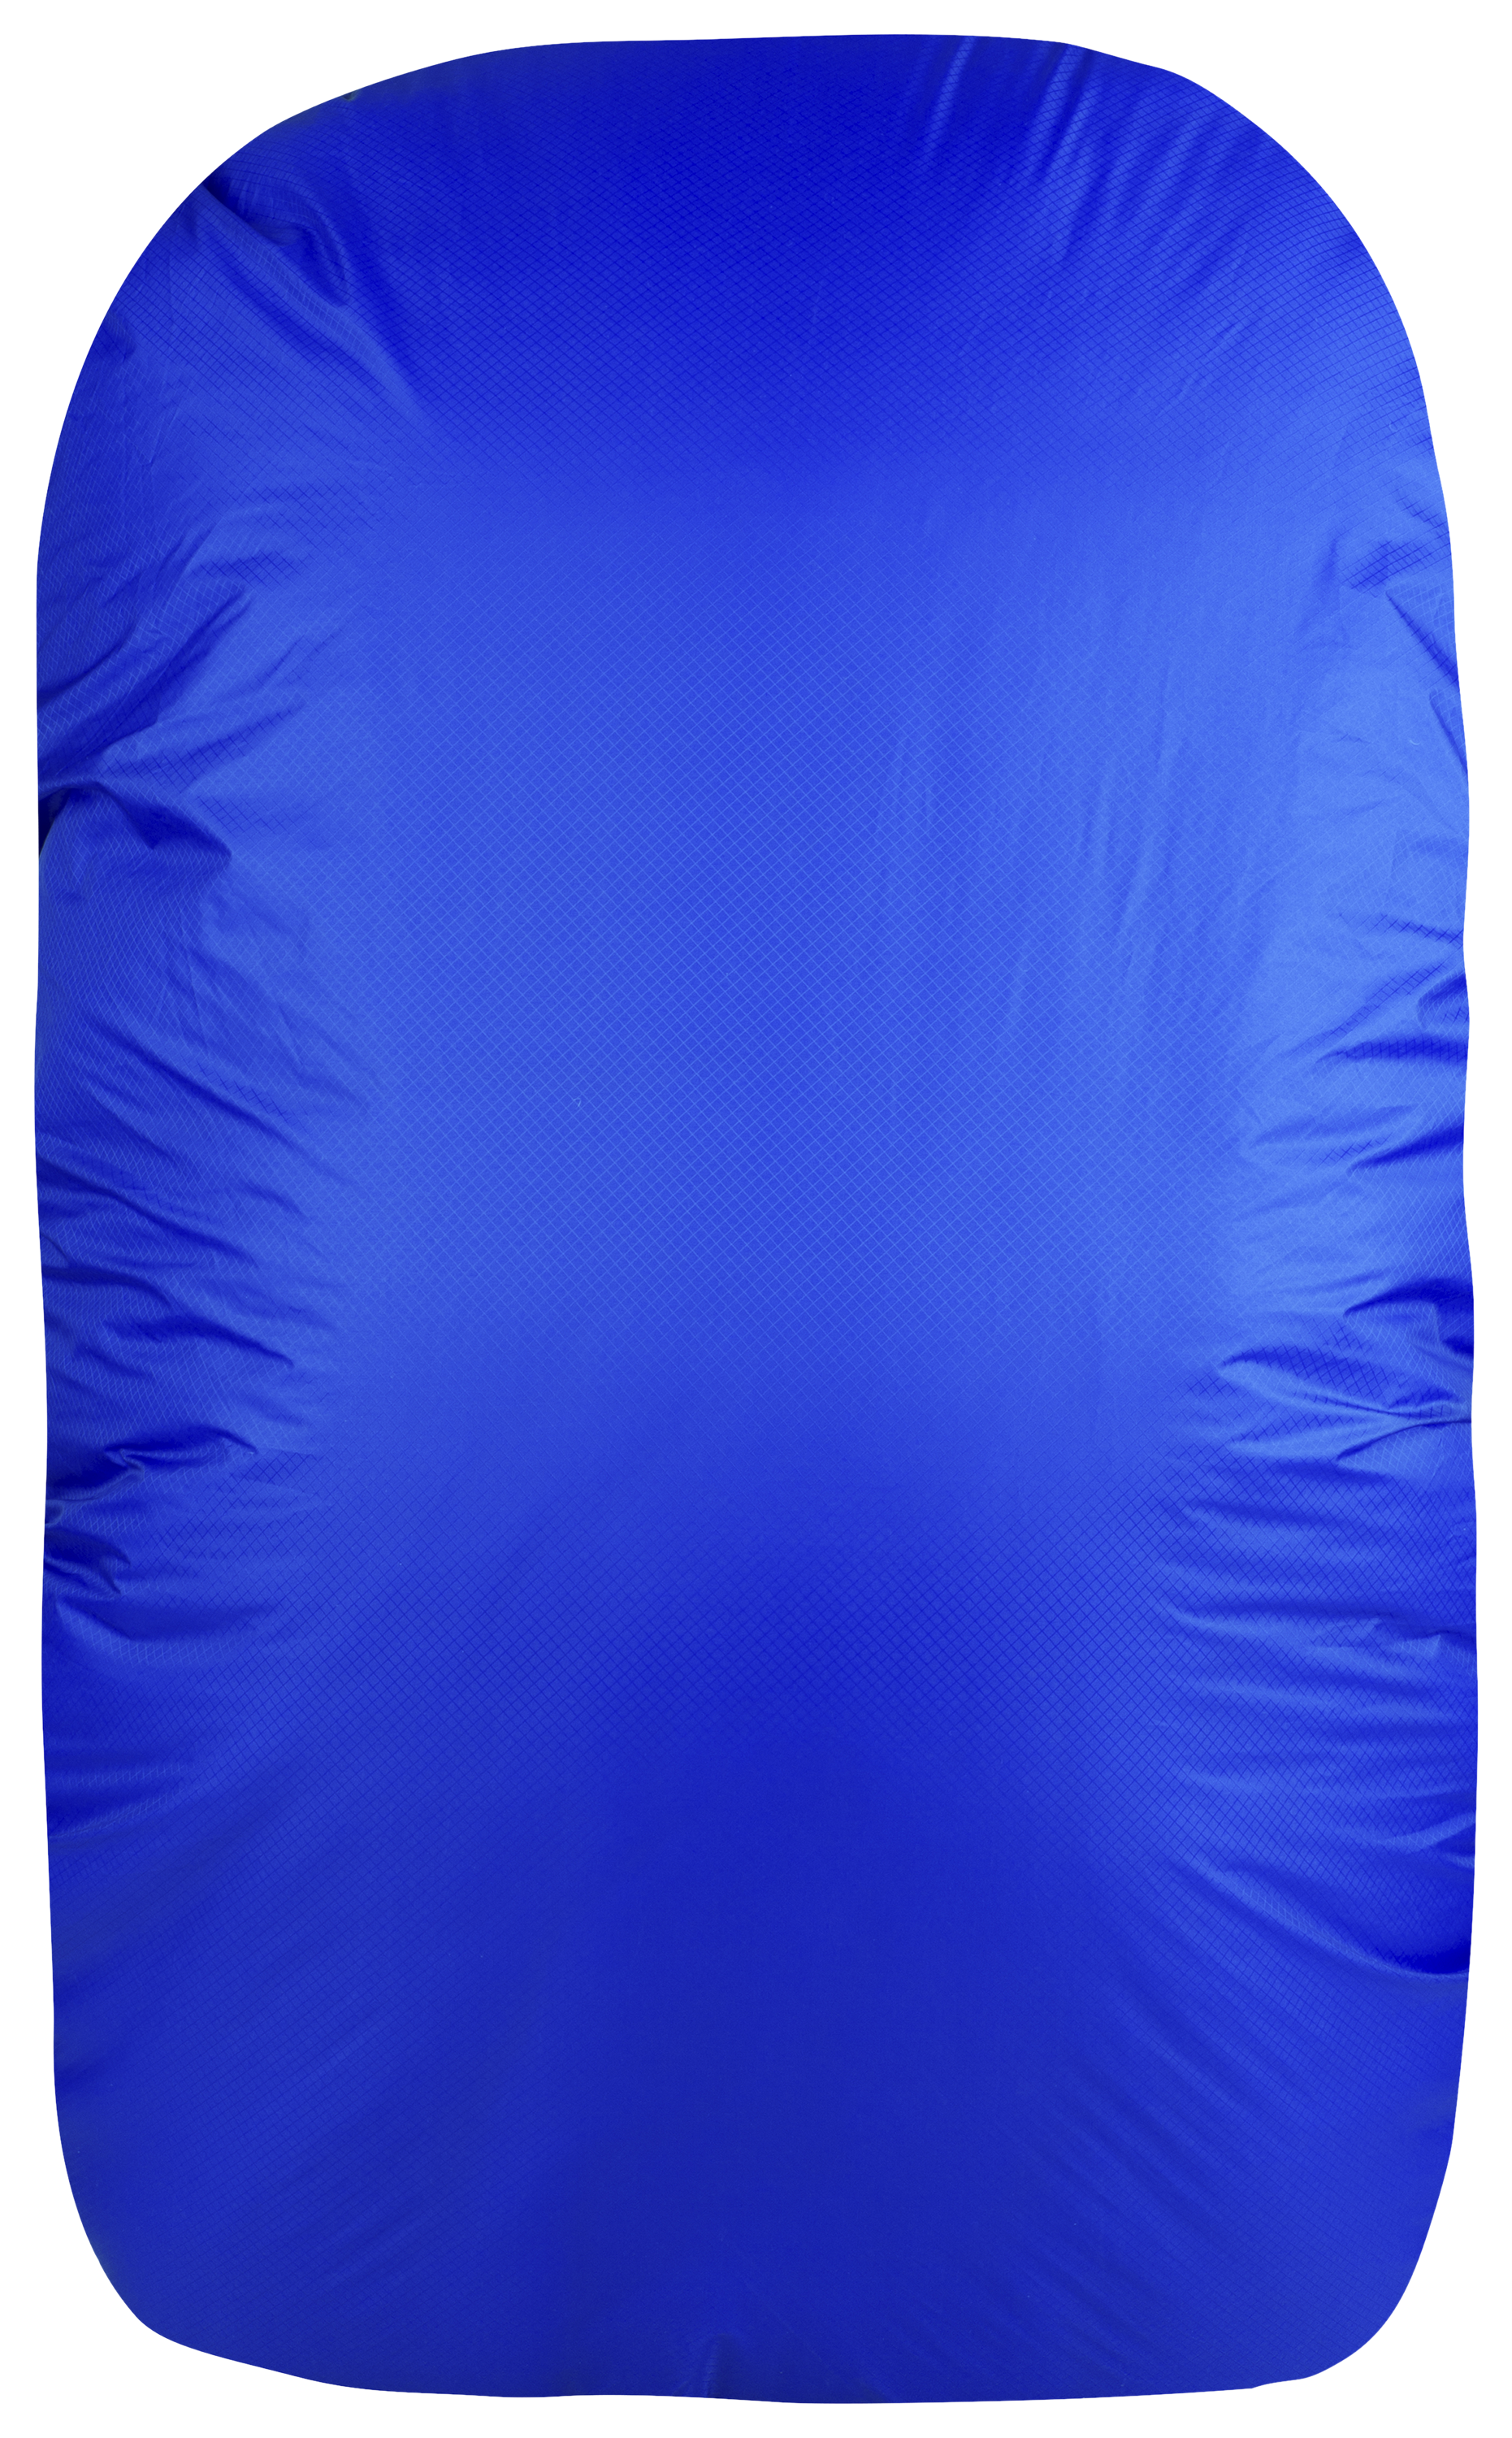 Sea to Summit Ultra-Sil Backpack Cover - Royal Blue - 50-70L - Medium